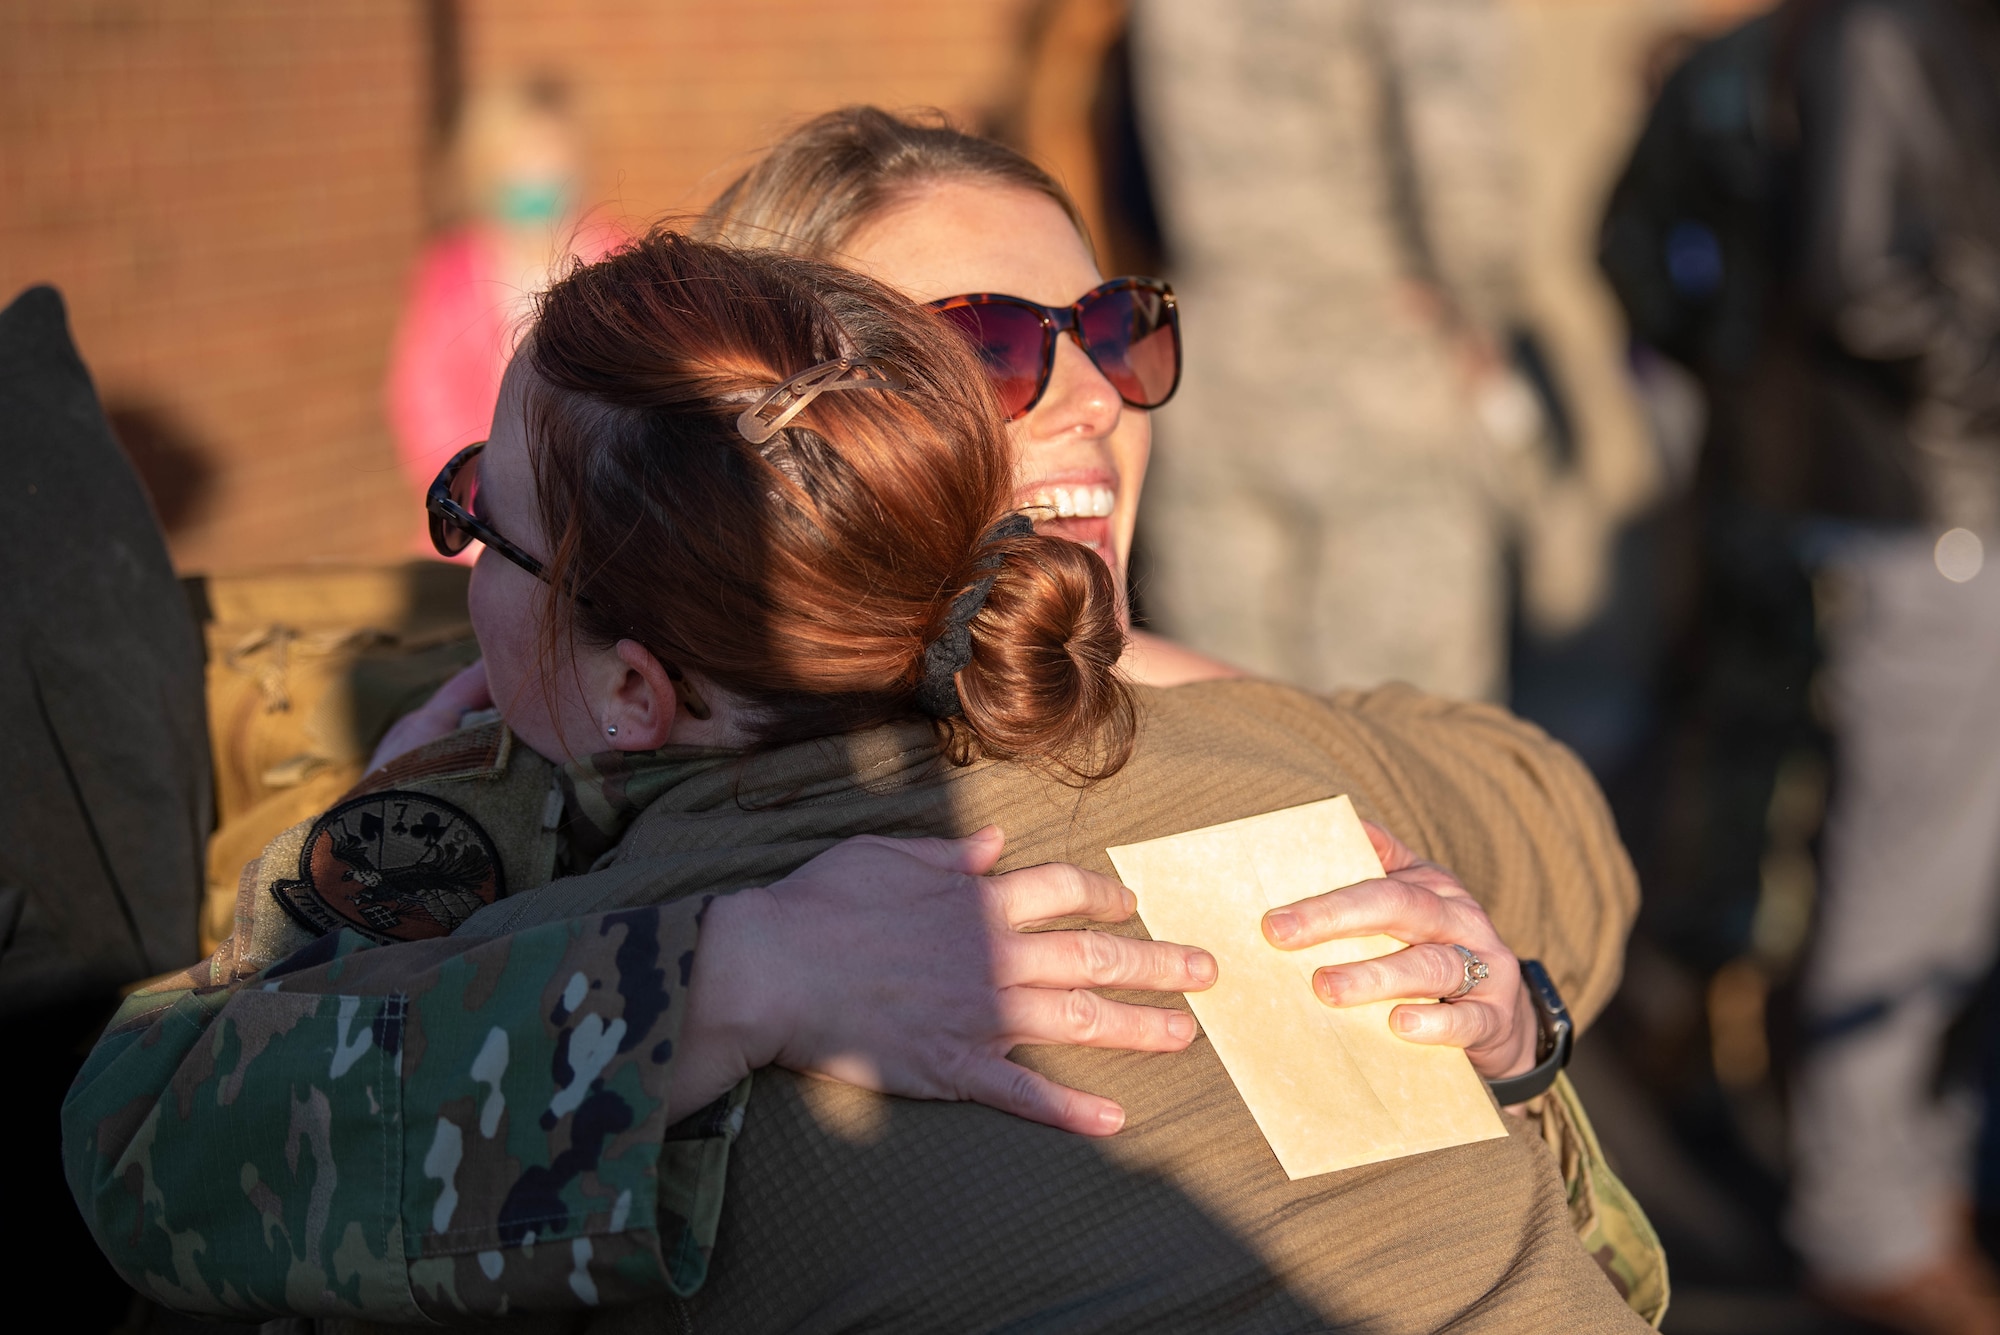 Two Airmen from the 123rd Airlift Wing embrace during a homecoming where more than 90 Airmen from the Kentucky Air National Guard returned to their home base in Louisville, Ky., Nov. 18, 2020, after completing a four-month deployment to the Middle East. The Airmen, who arrived aboard Kentucky Air Guard C-130 Hercules aircraft, operated from an undisclosed air base while flying troops and cargo across the U.S. Central Command Area of Responsibility in support of Operations Inherent Resolve and Freedom’s Sentinel. (U.S. Air National Guard photo by Phil Speck)